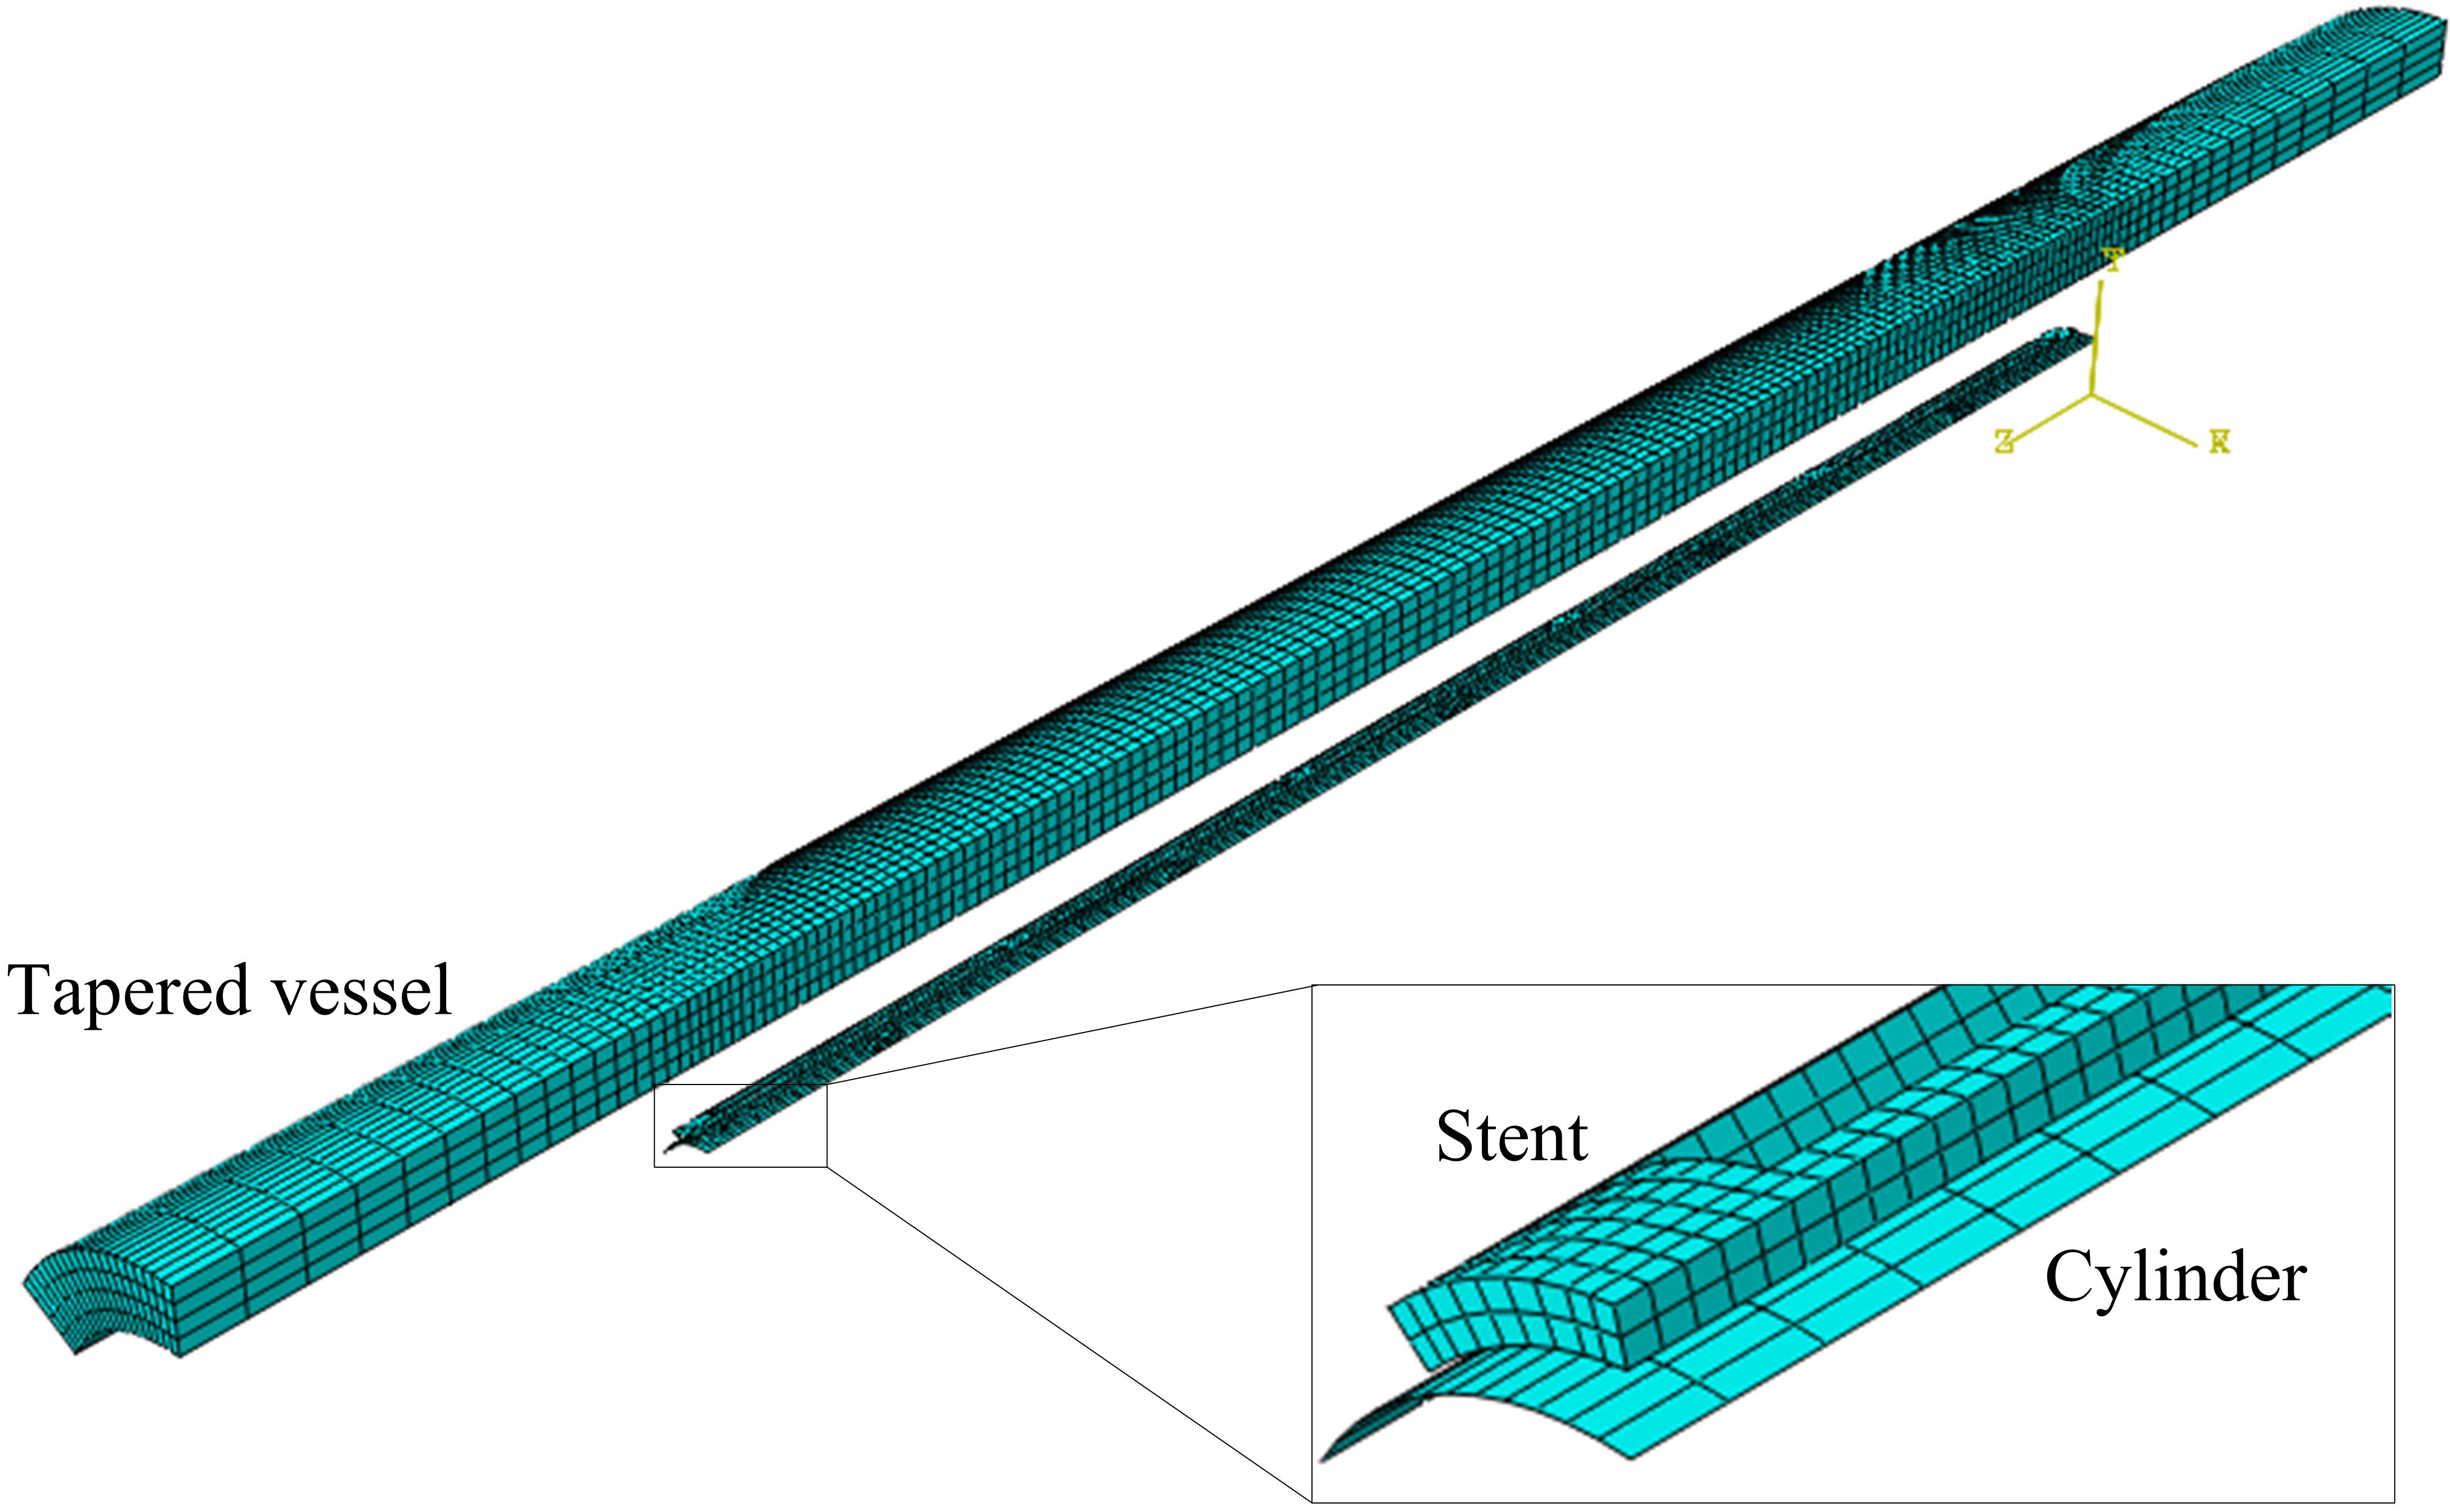 Finite element models of a stent deployment in a tapered vessel.